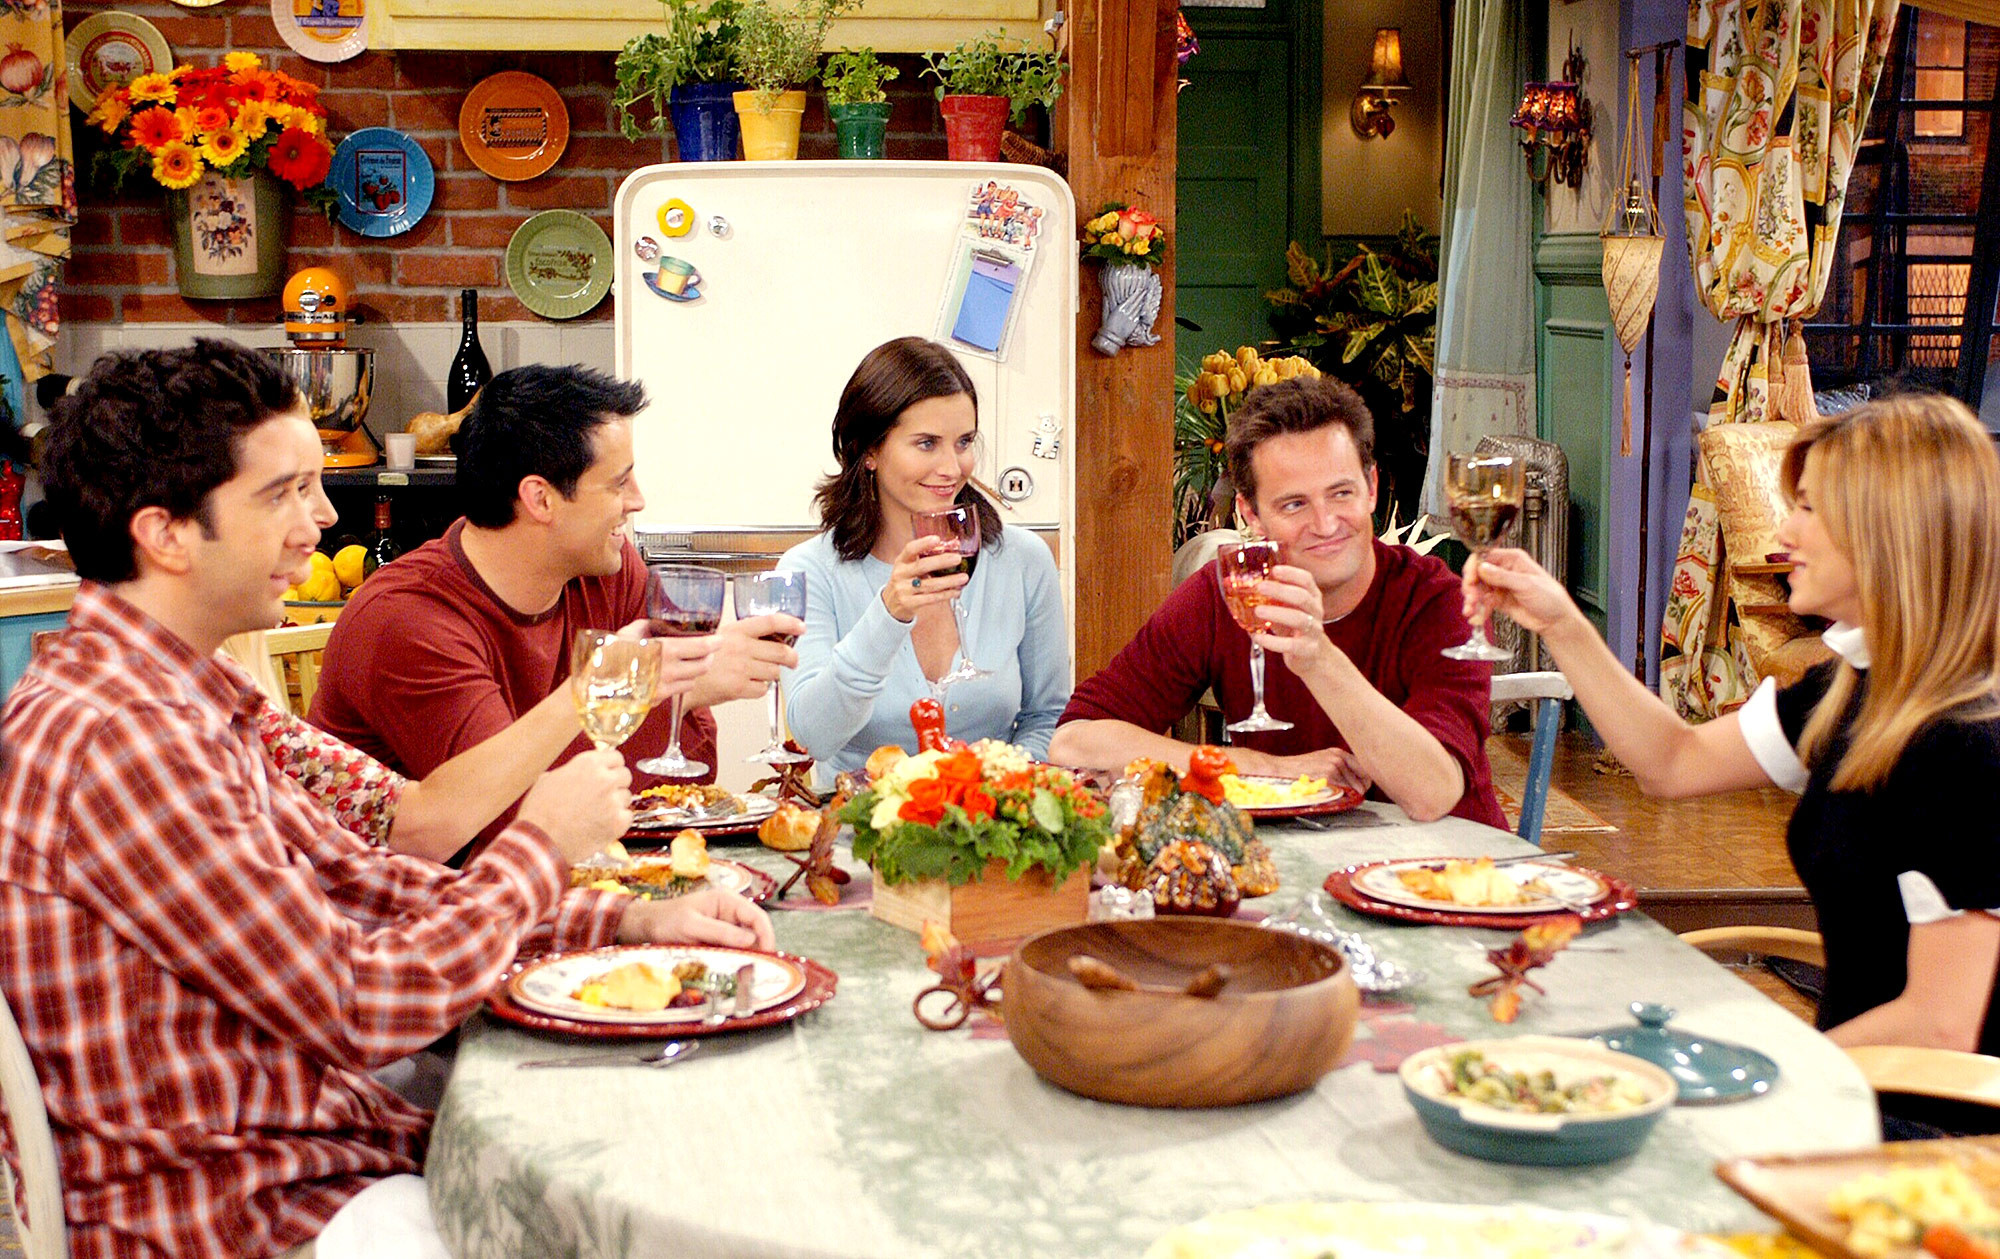 cast of Friends eating holiday meal together